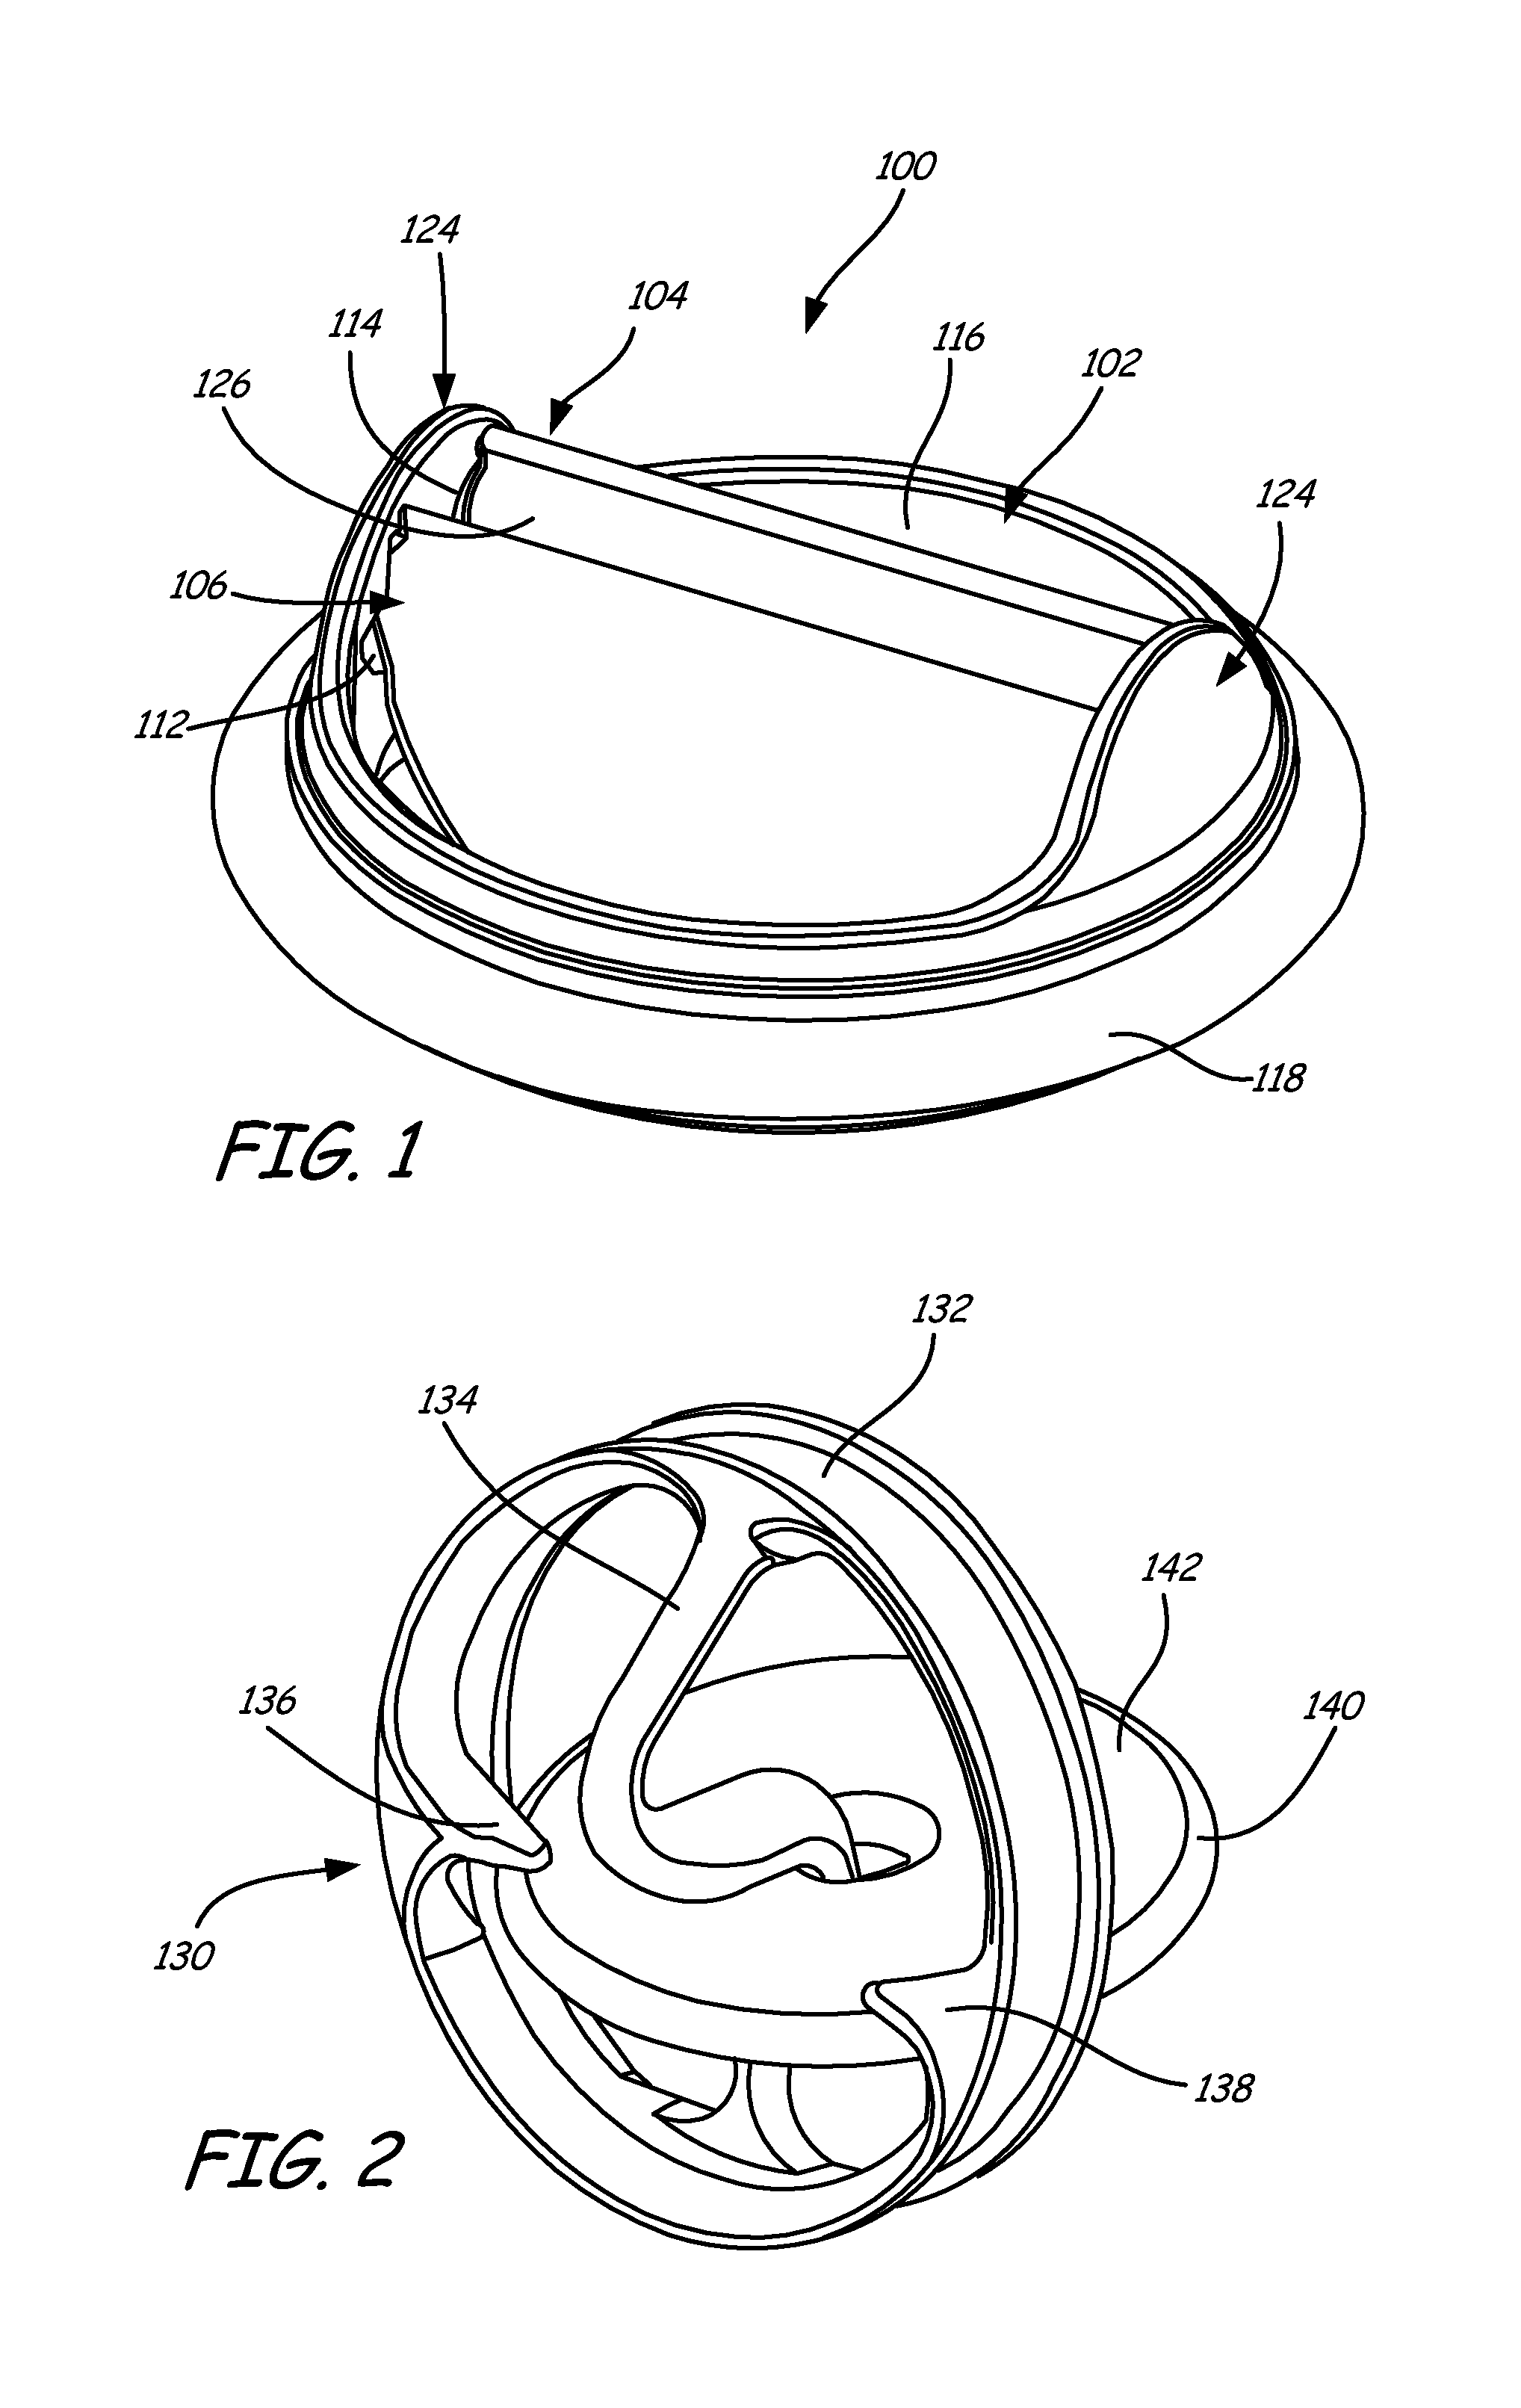 Valved prosthesis with porous substrate